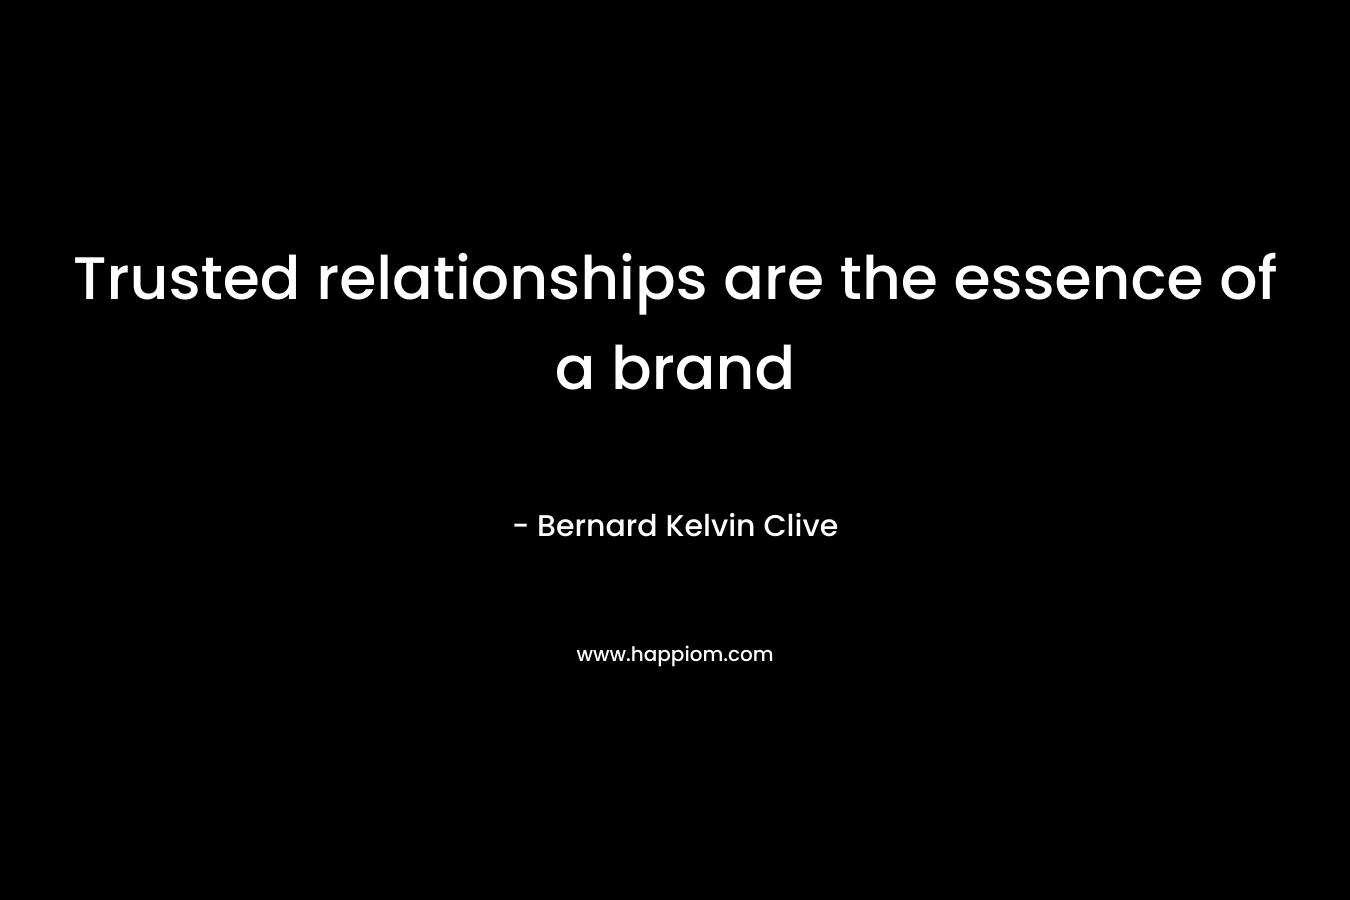 Trusted relationships are the essence of a brand